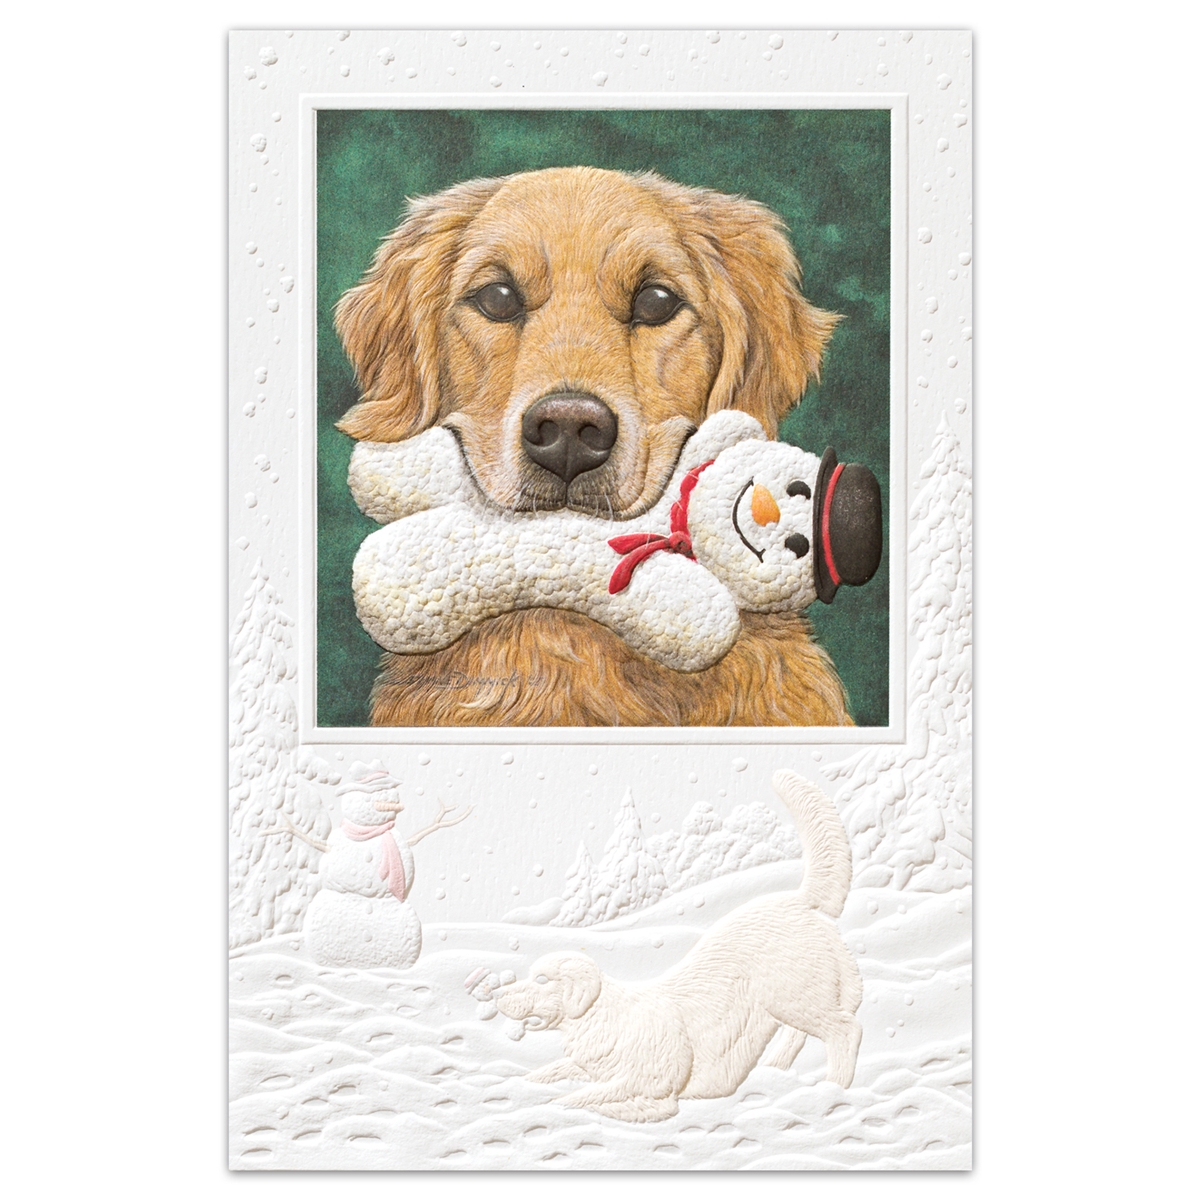 Favorite Toy Holiday Cards